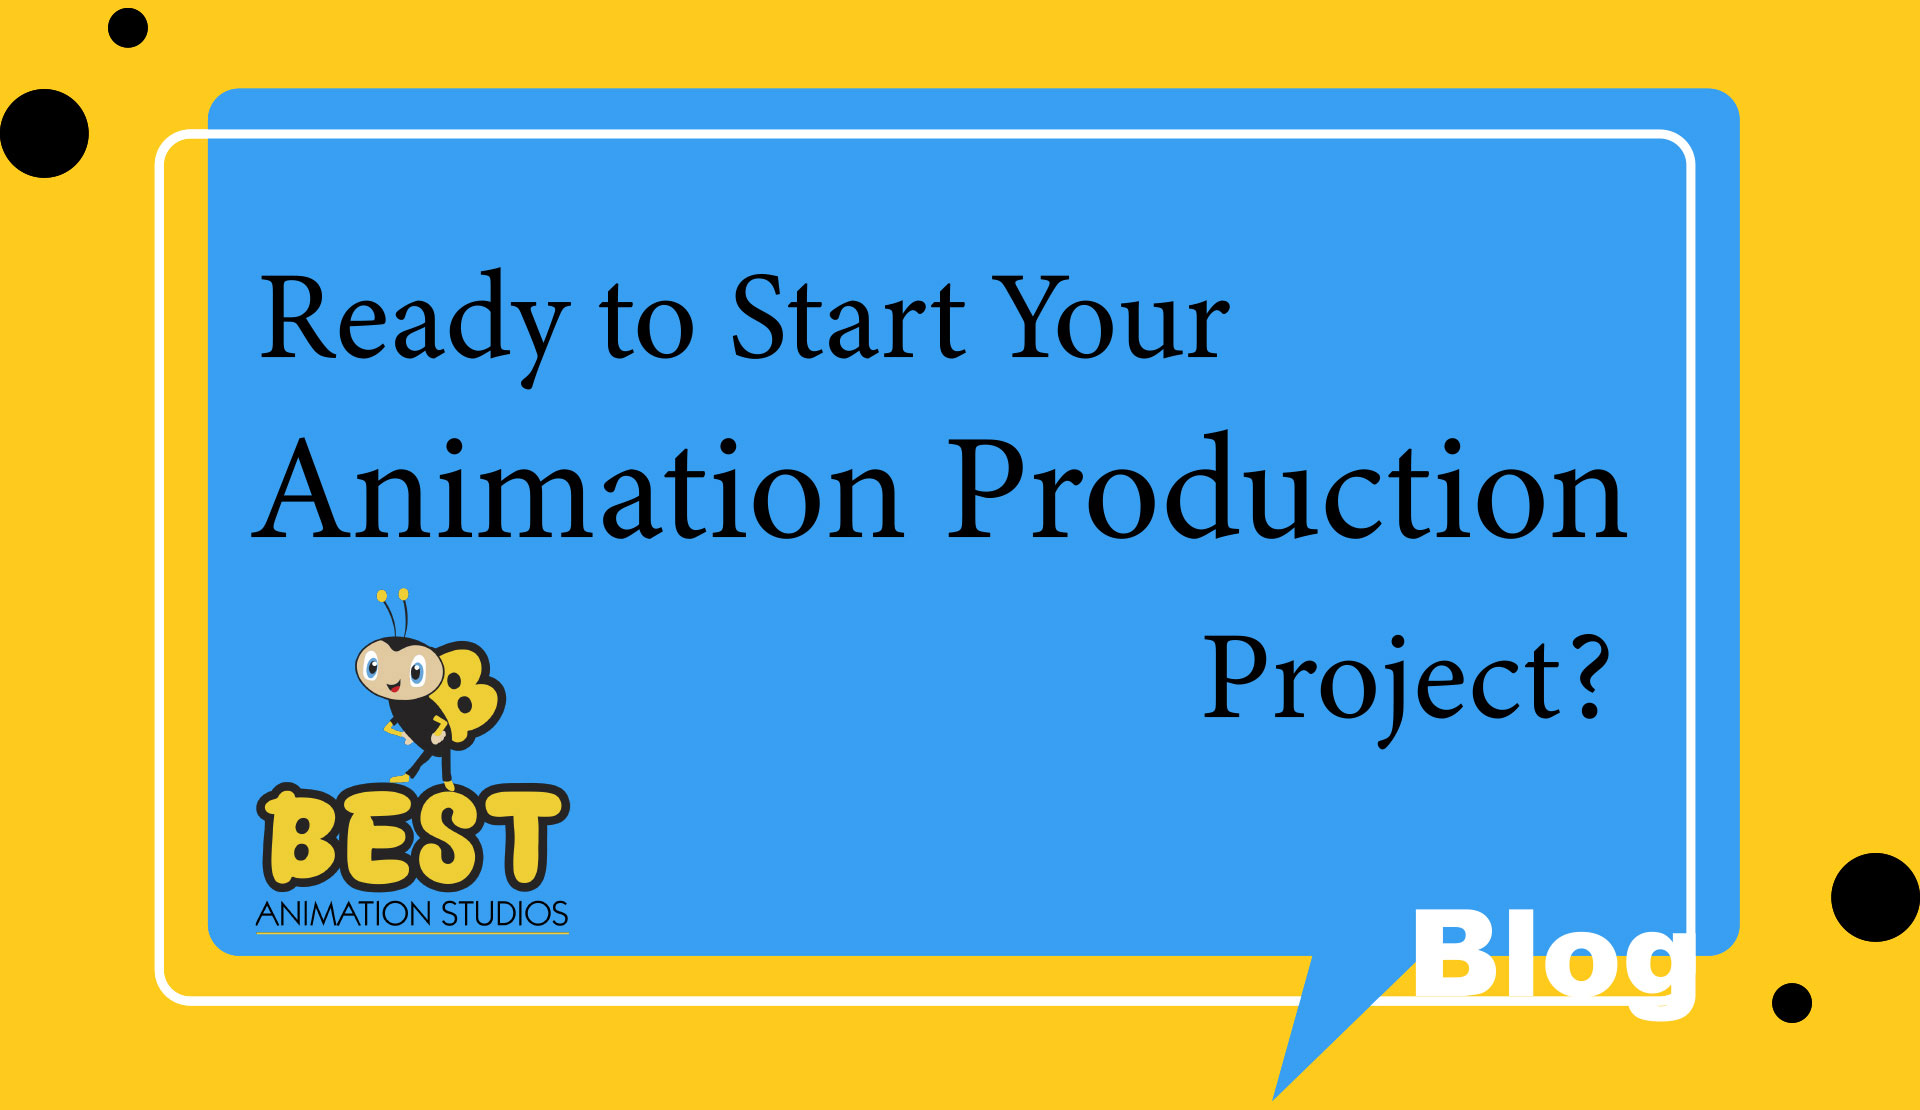 Ready to Start Your Animation Production Project?